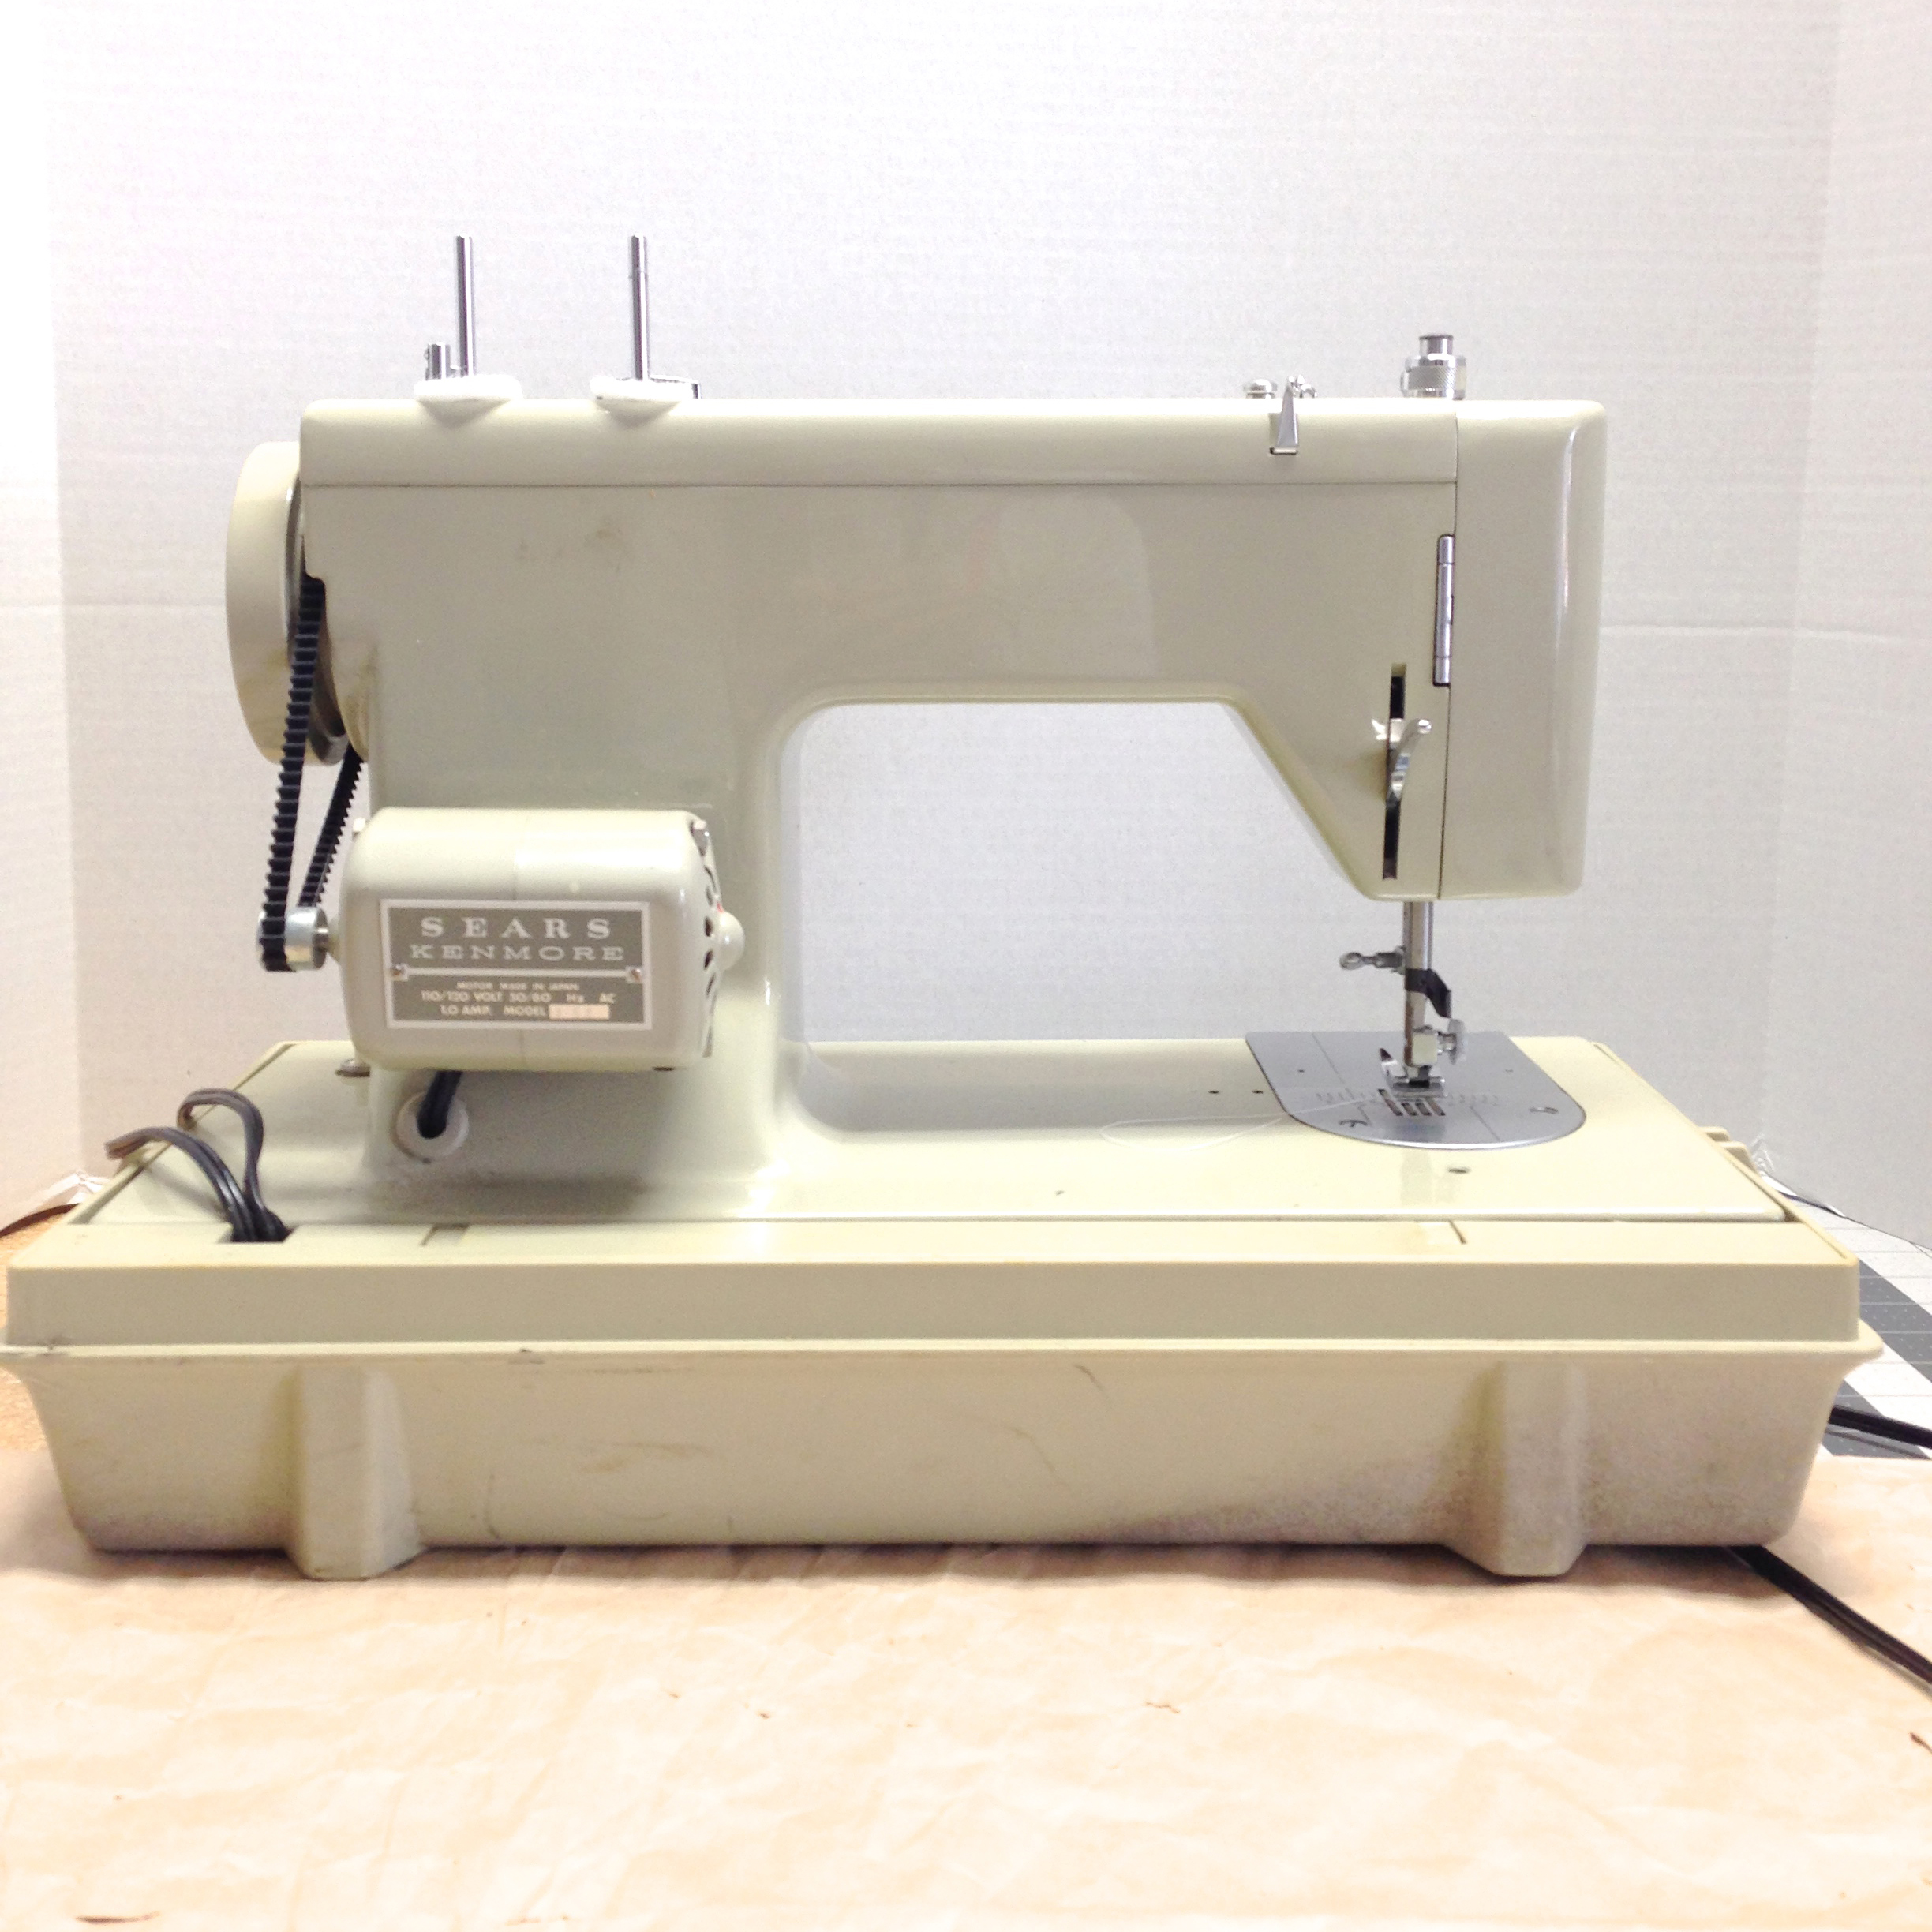 Green Sears Kenmore 158.17511 (Model 1751) Sewing Machine – A Review  (Updated 11-14-11)